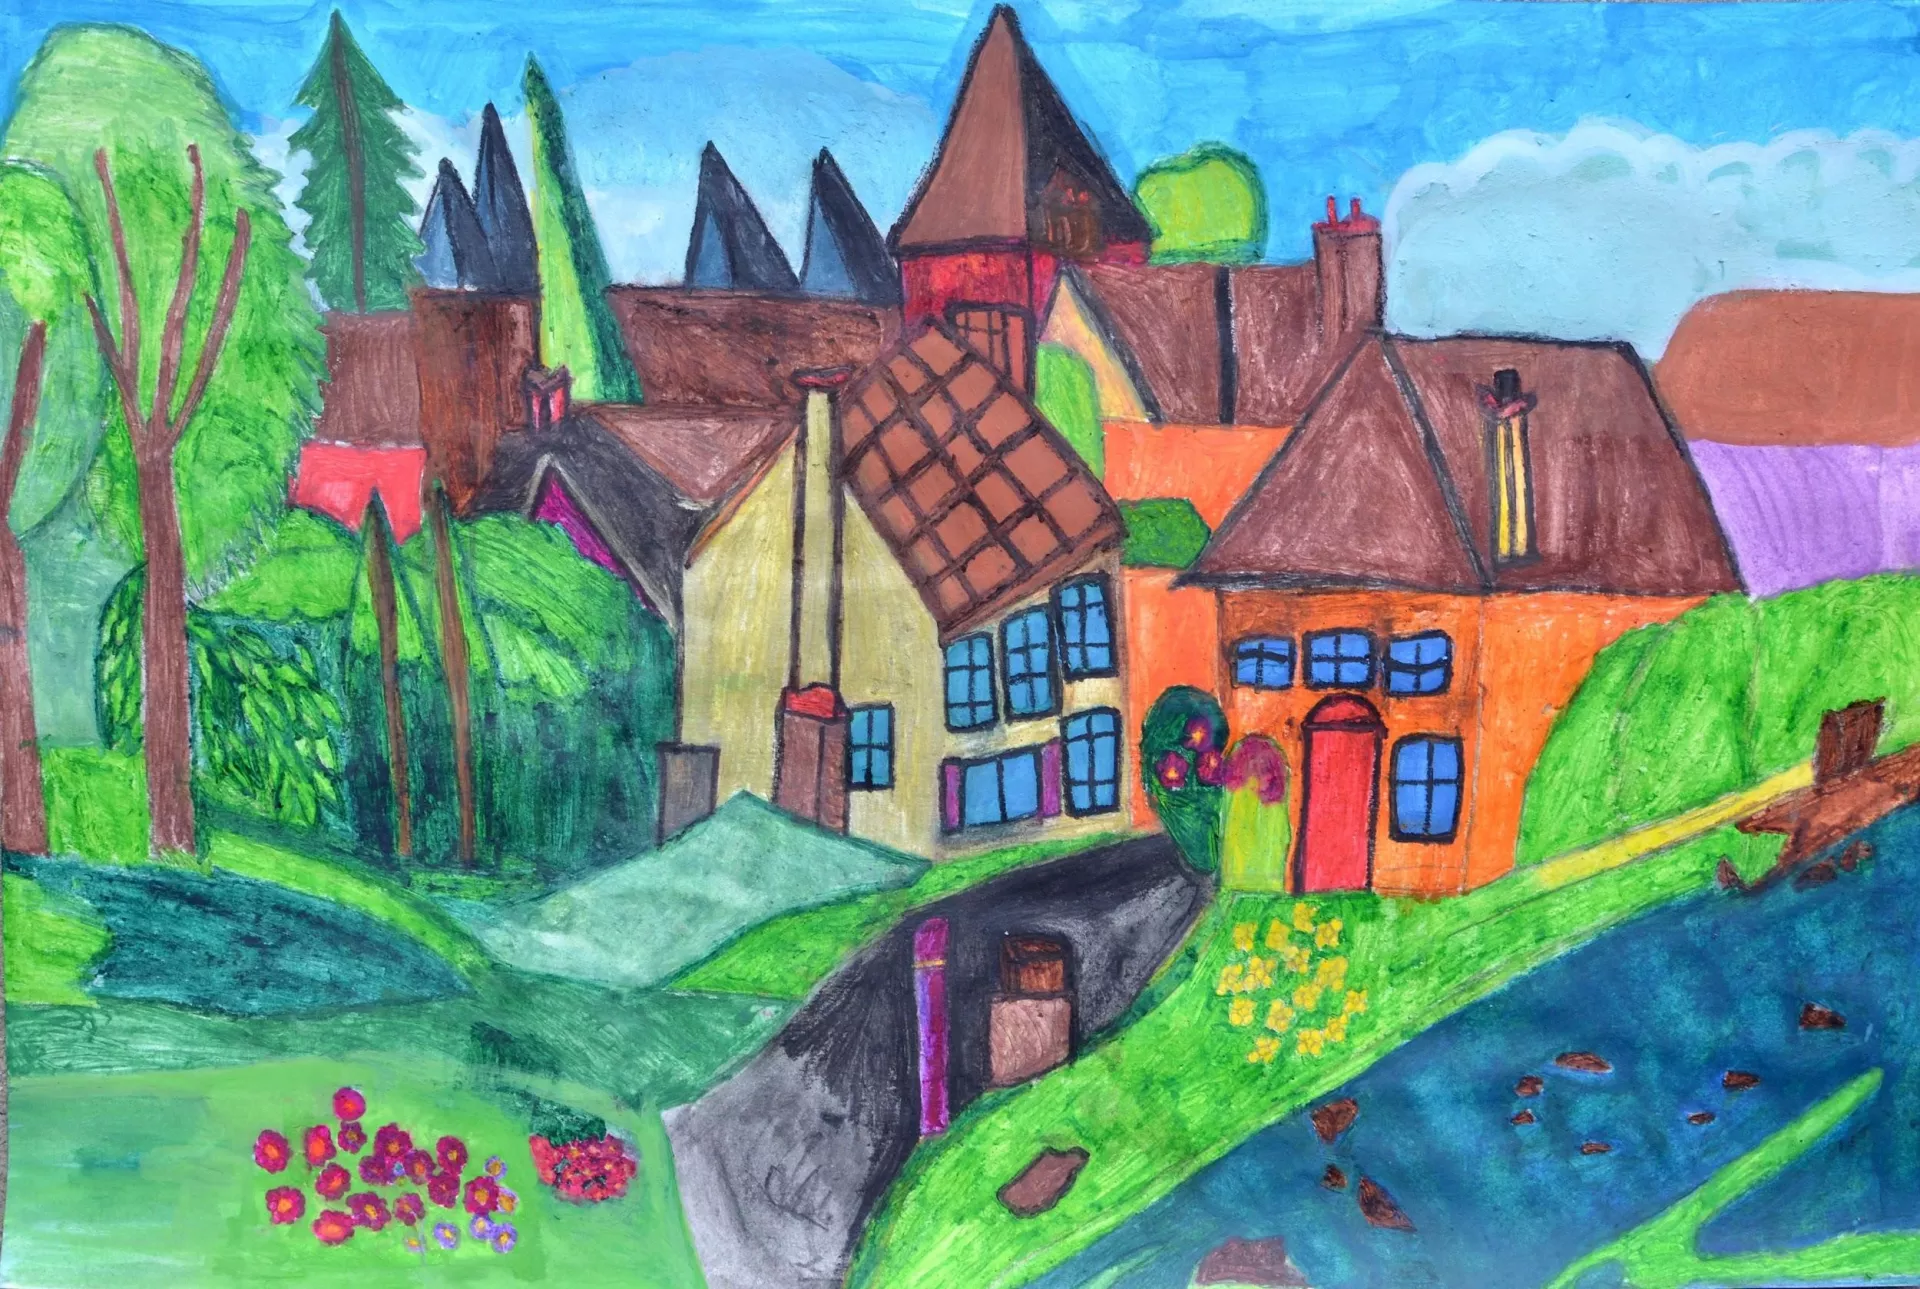 In the center of the picture lies a village with rooftops peeking through the trees and windows reflecting the blue sky. The surrounding landscape has a variety of trees and bushes, rolling hills and paths, with speckled flowers in the foreground. Jackie enjoys using Architectural Digest for inspiration and accentuates elements with bright pops of color.